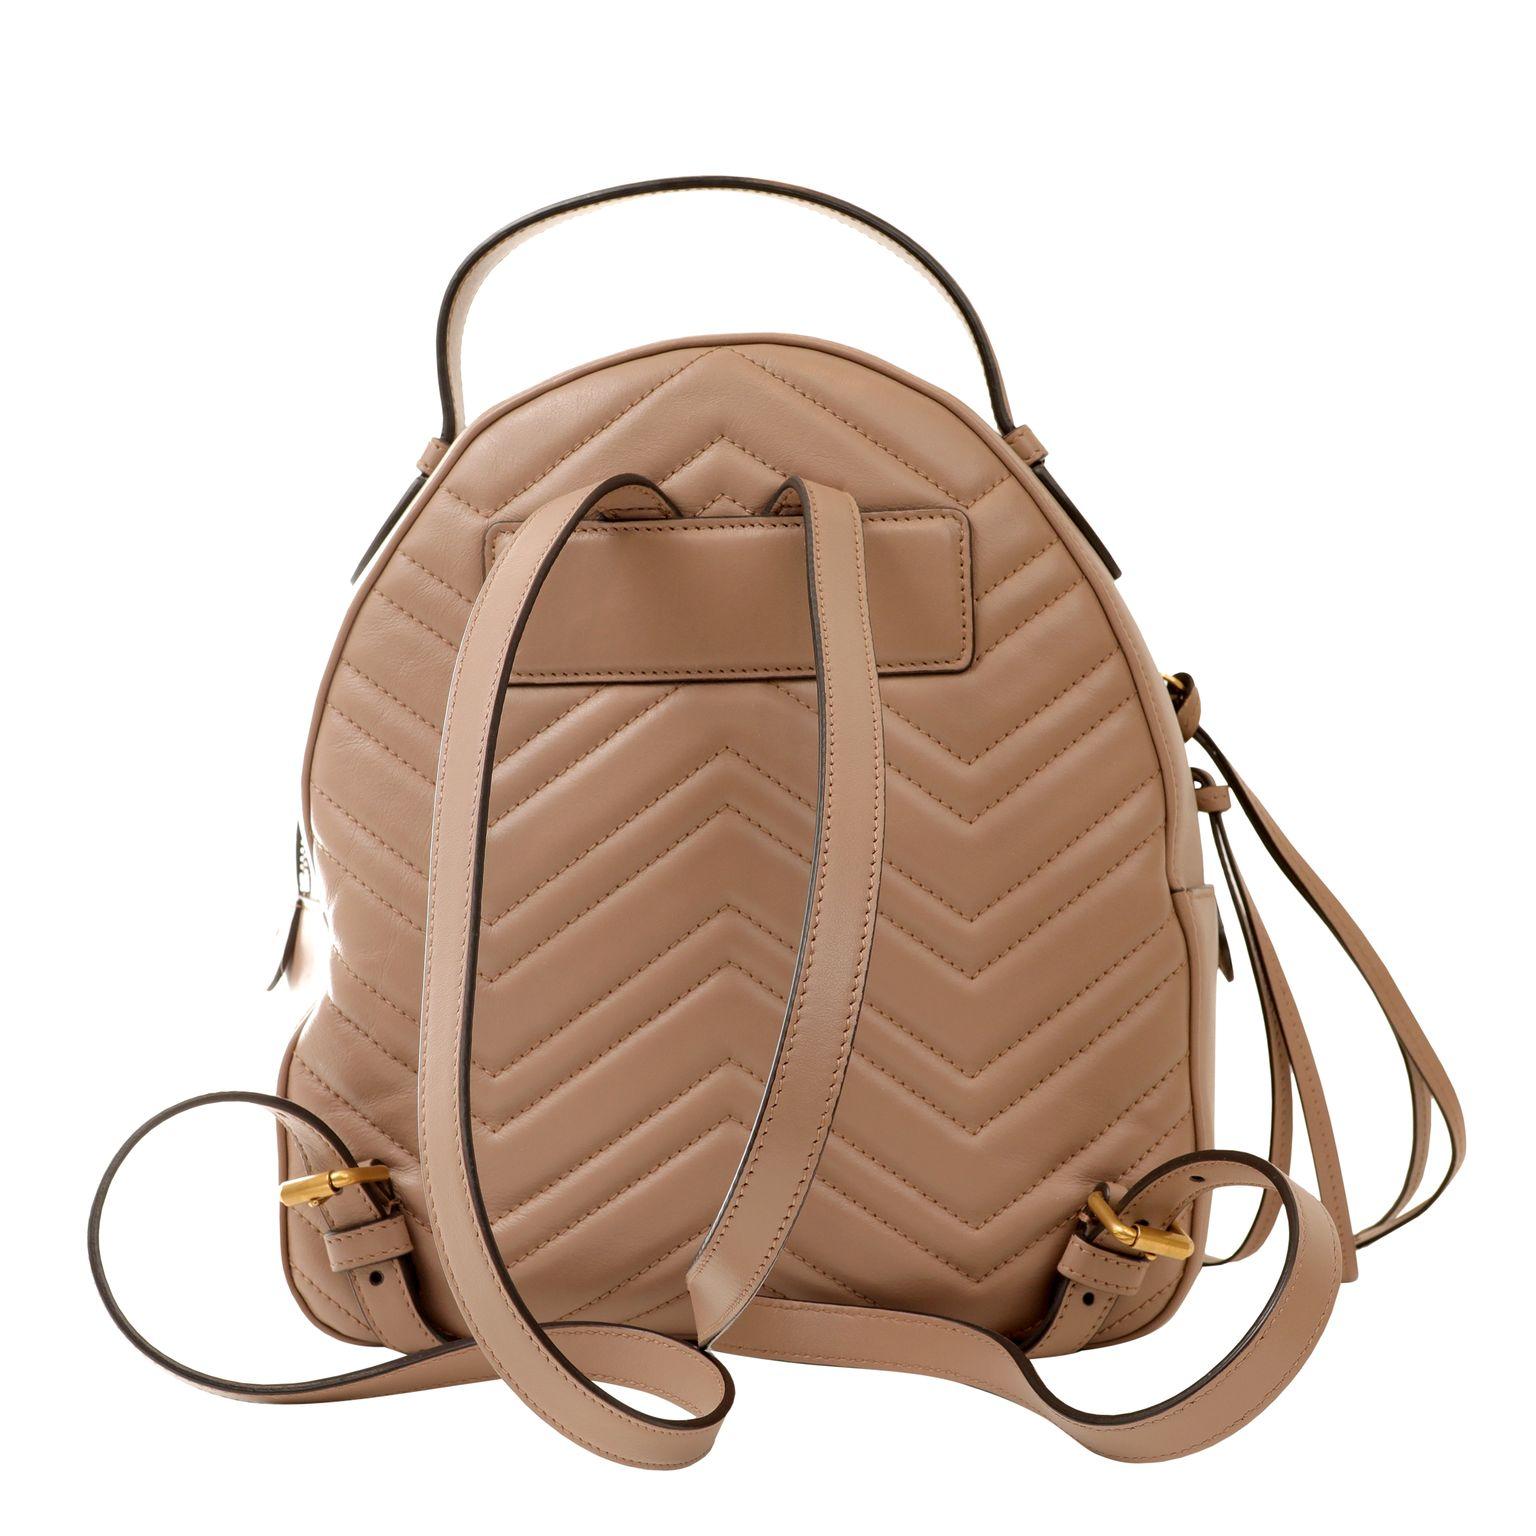 This authentic Gucci Taupe Leather GG Marmont Backpack is pristine.  Taupe leather backpack is stitched with chevron pattern.  Gold tone large GG insignia.  Adjustable straps and zippered access. Dust bag included.

PBF 14031